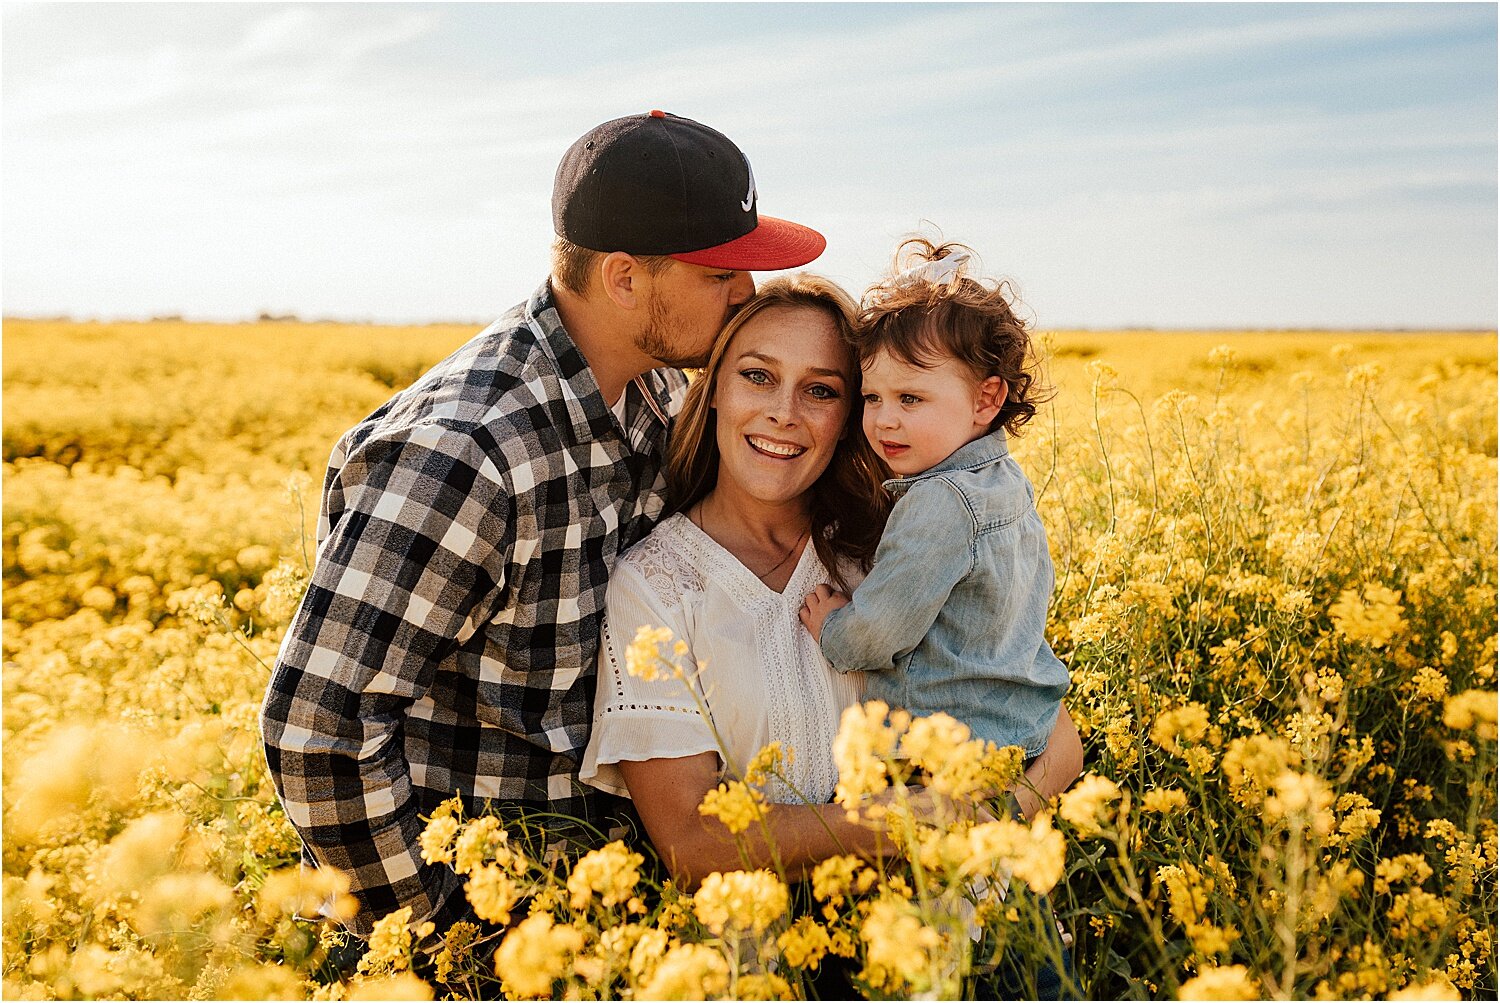 spring field of yellow flowers family session7.jpg